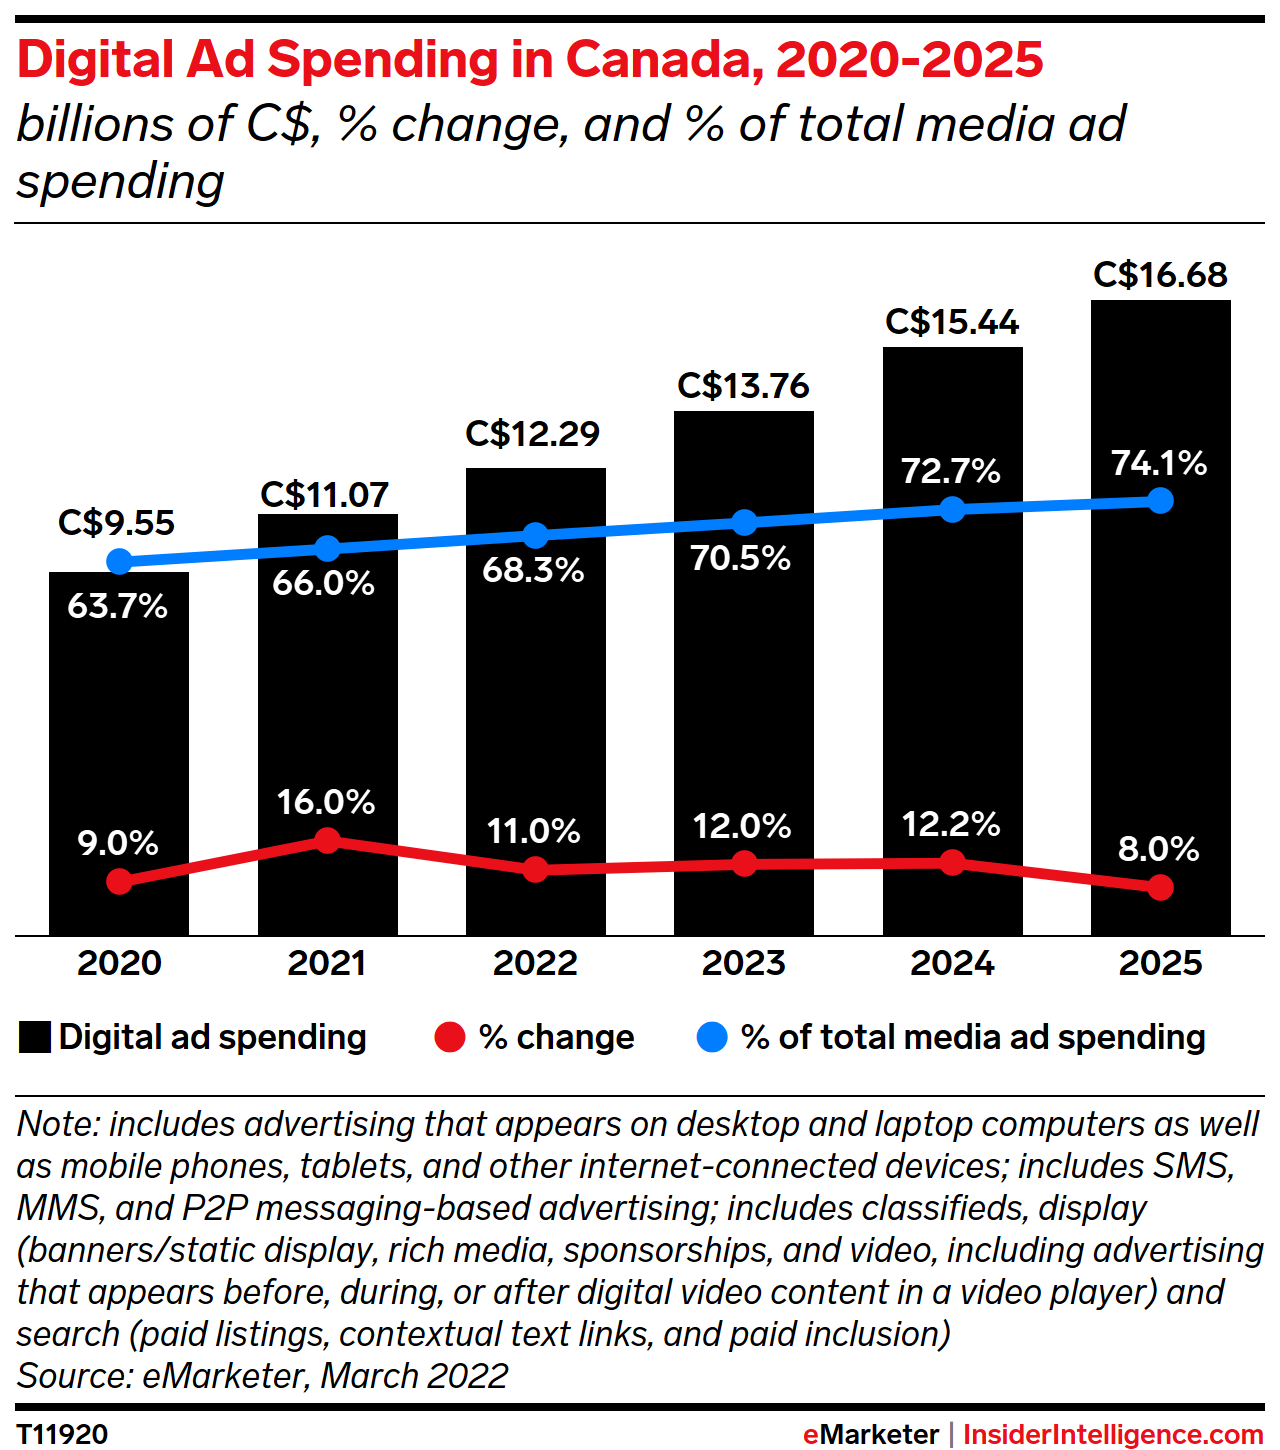 Digital Ad Spending in Canada, 2020-2025 (billions of C$, % change, and % of total media ad spending)